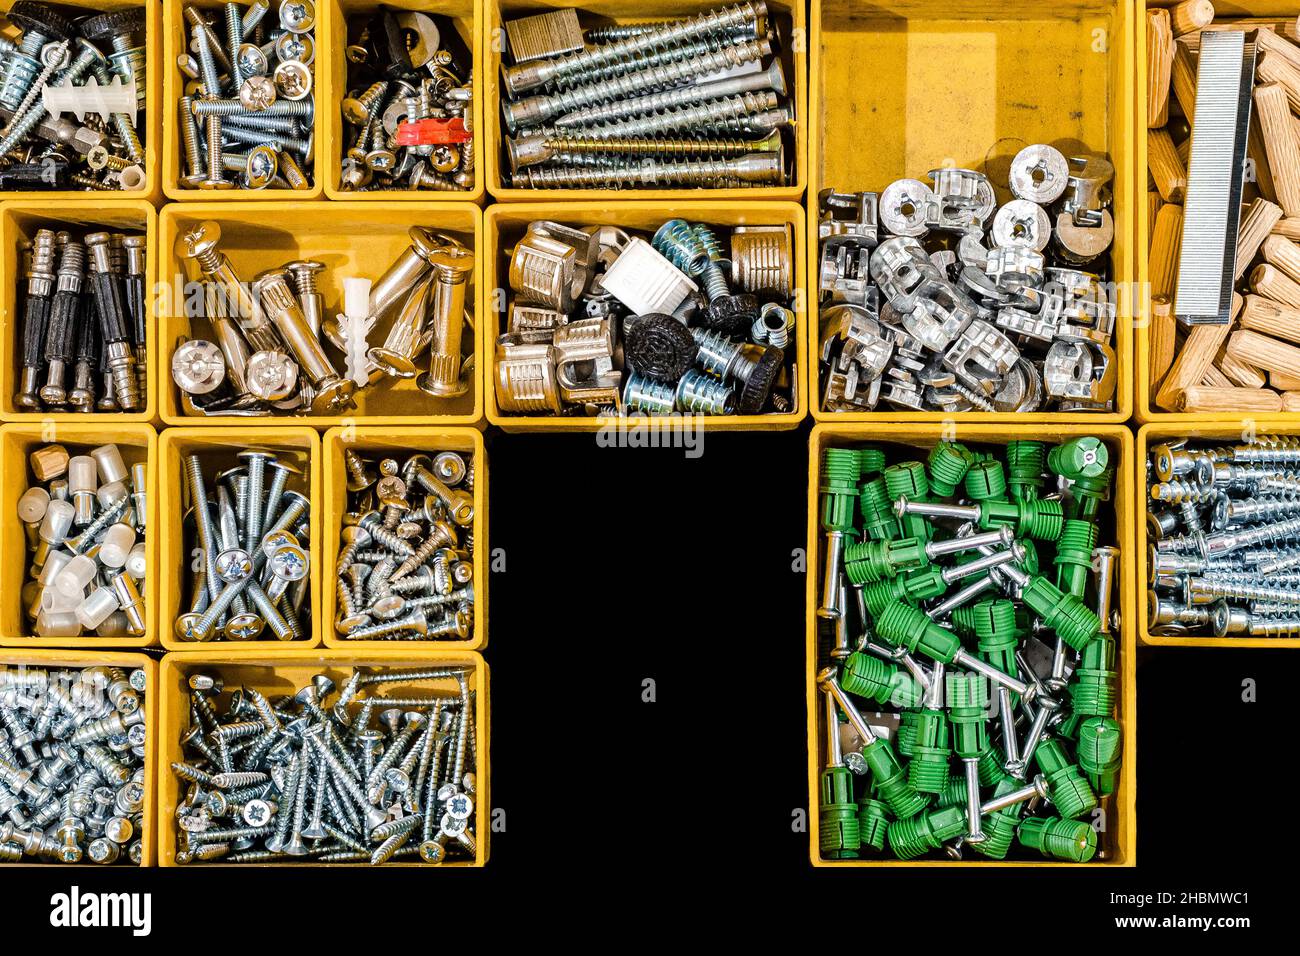 A set of bolts and self-tapping screws for mounting and assembling furniture for home and office. Many storage compartments filled with builders acces Stock Photo